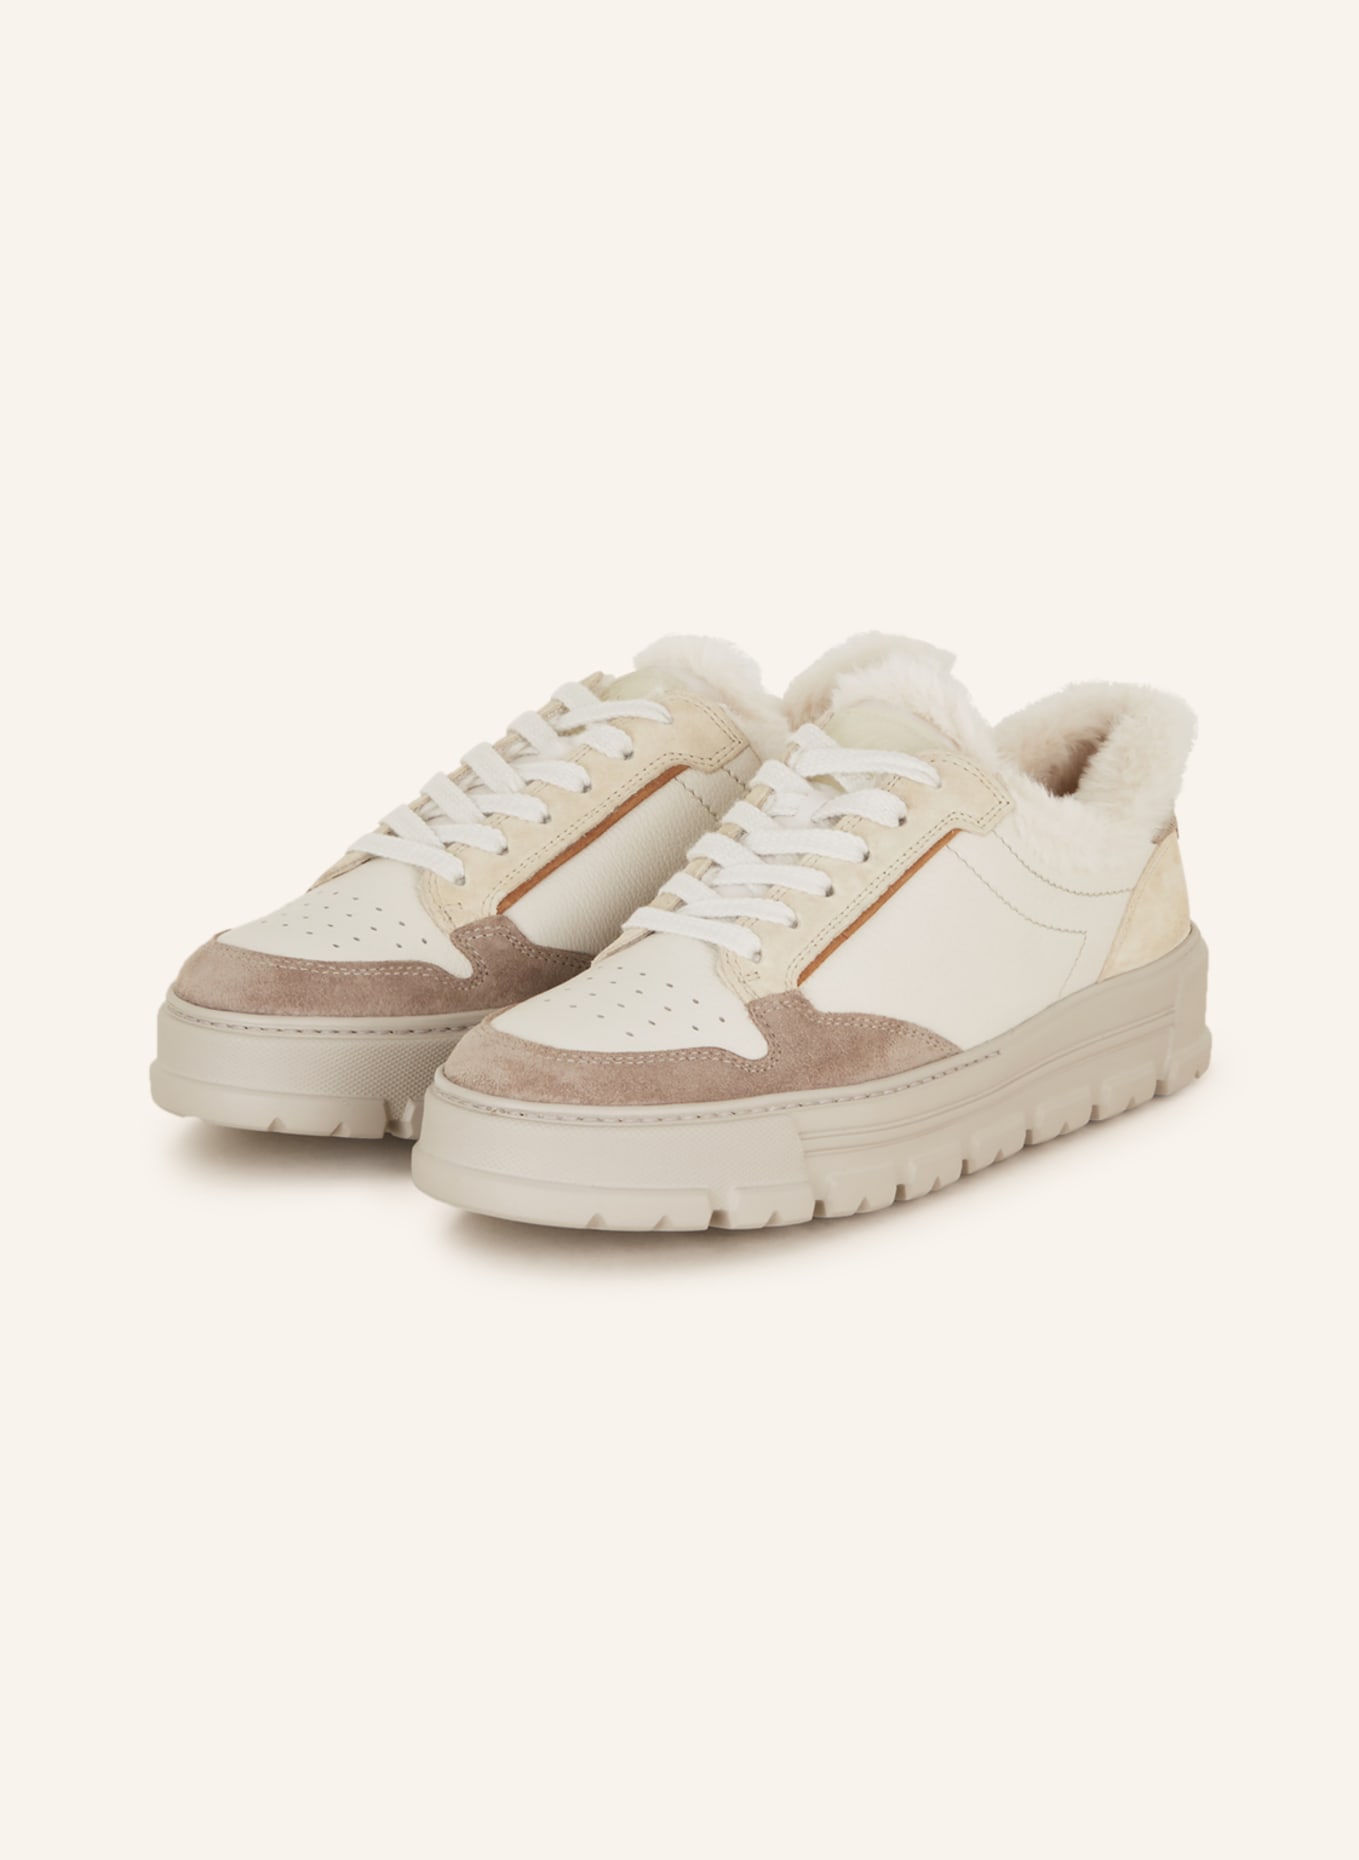 paul green Sneakers in white/ taupe/ cream